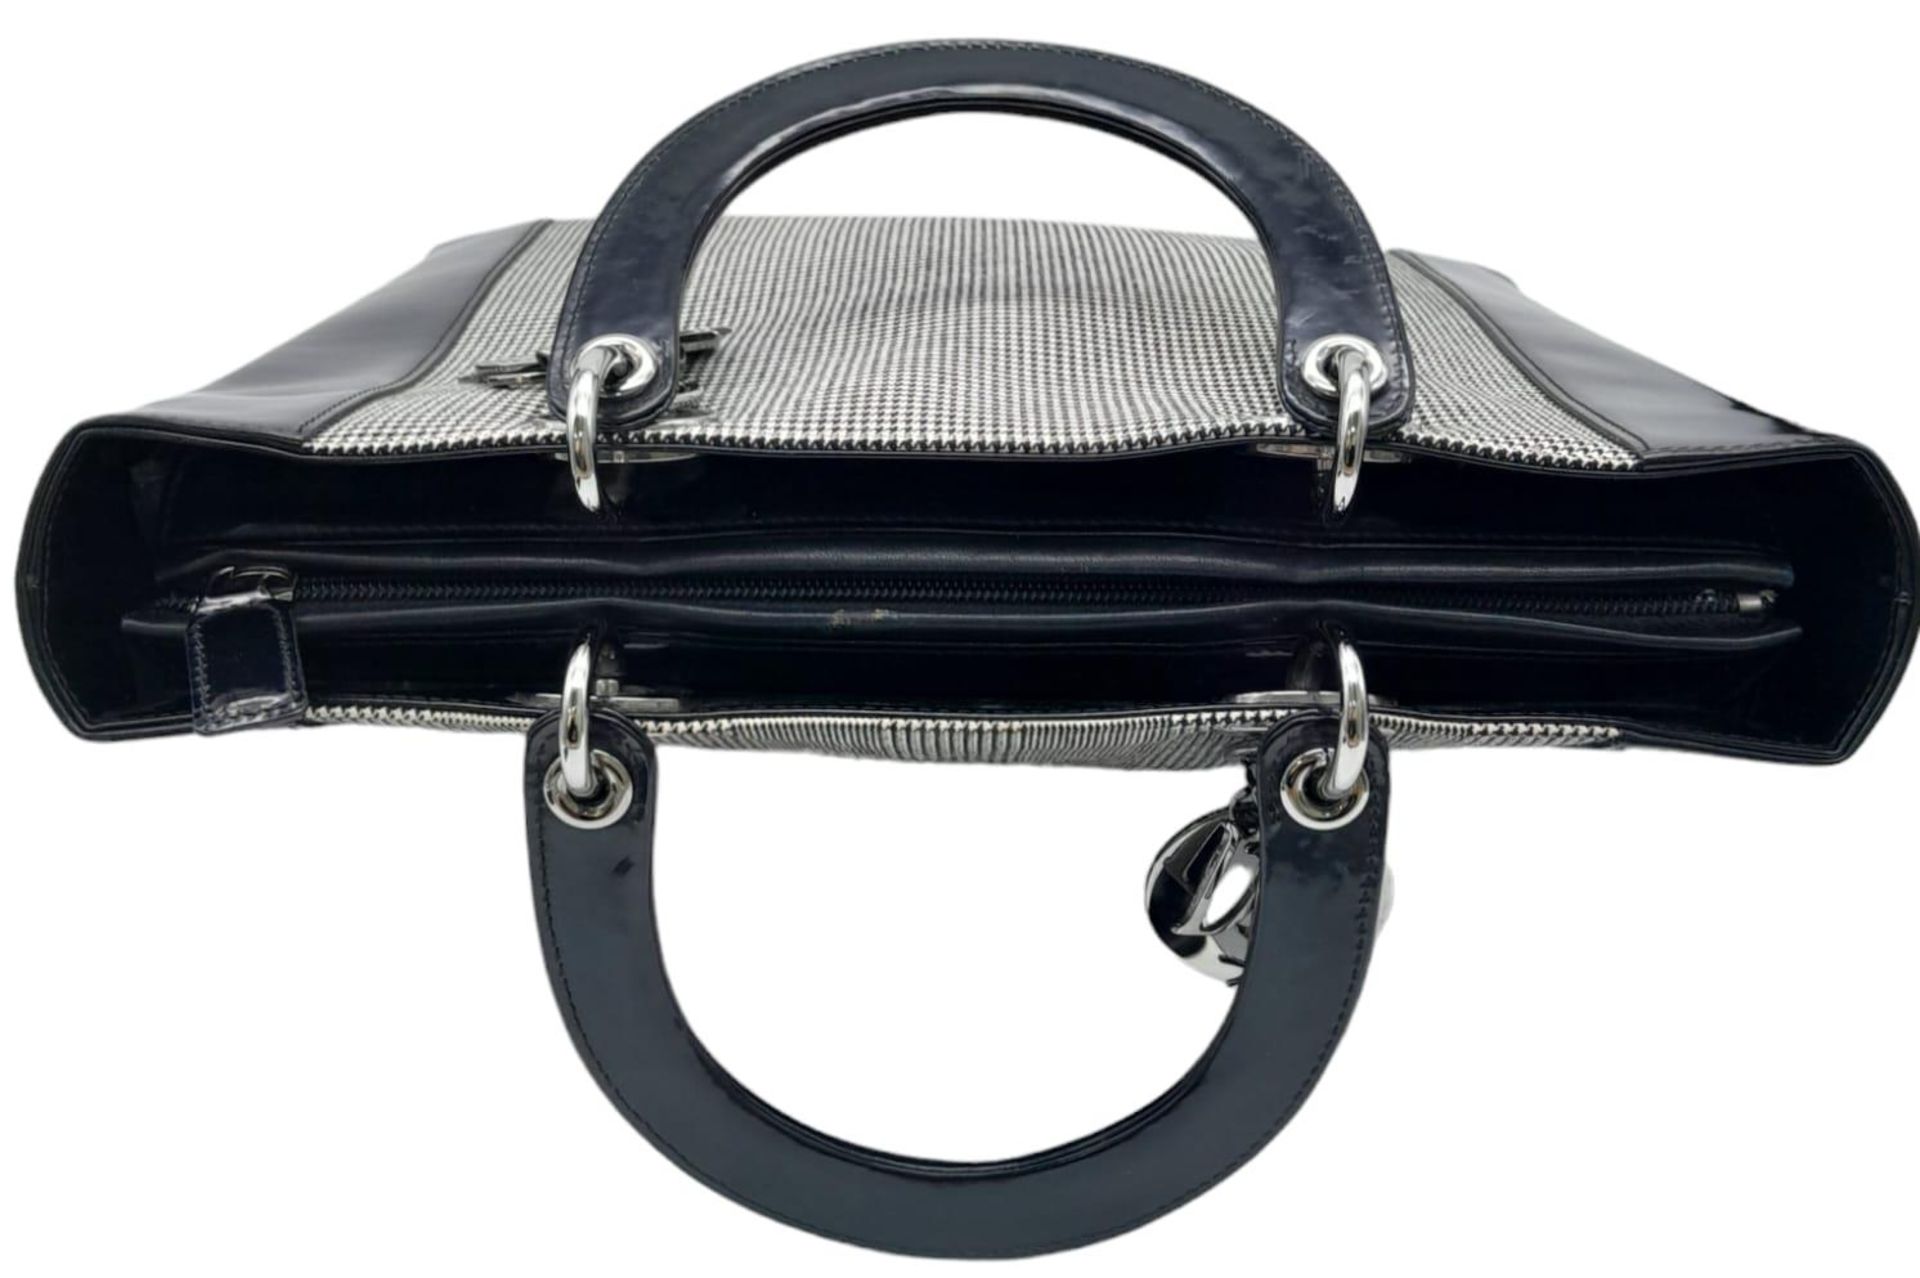 A Christian Dior - Lady Dior Bag. Canvas and black patent leather exterior. Silver tone hardware. - Image 5 of 9